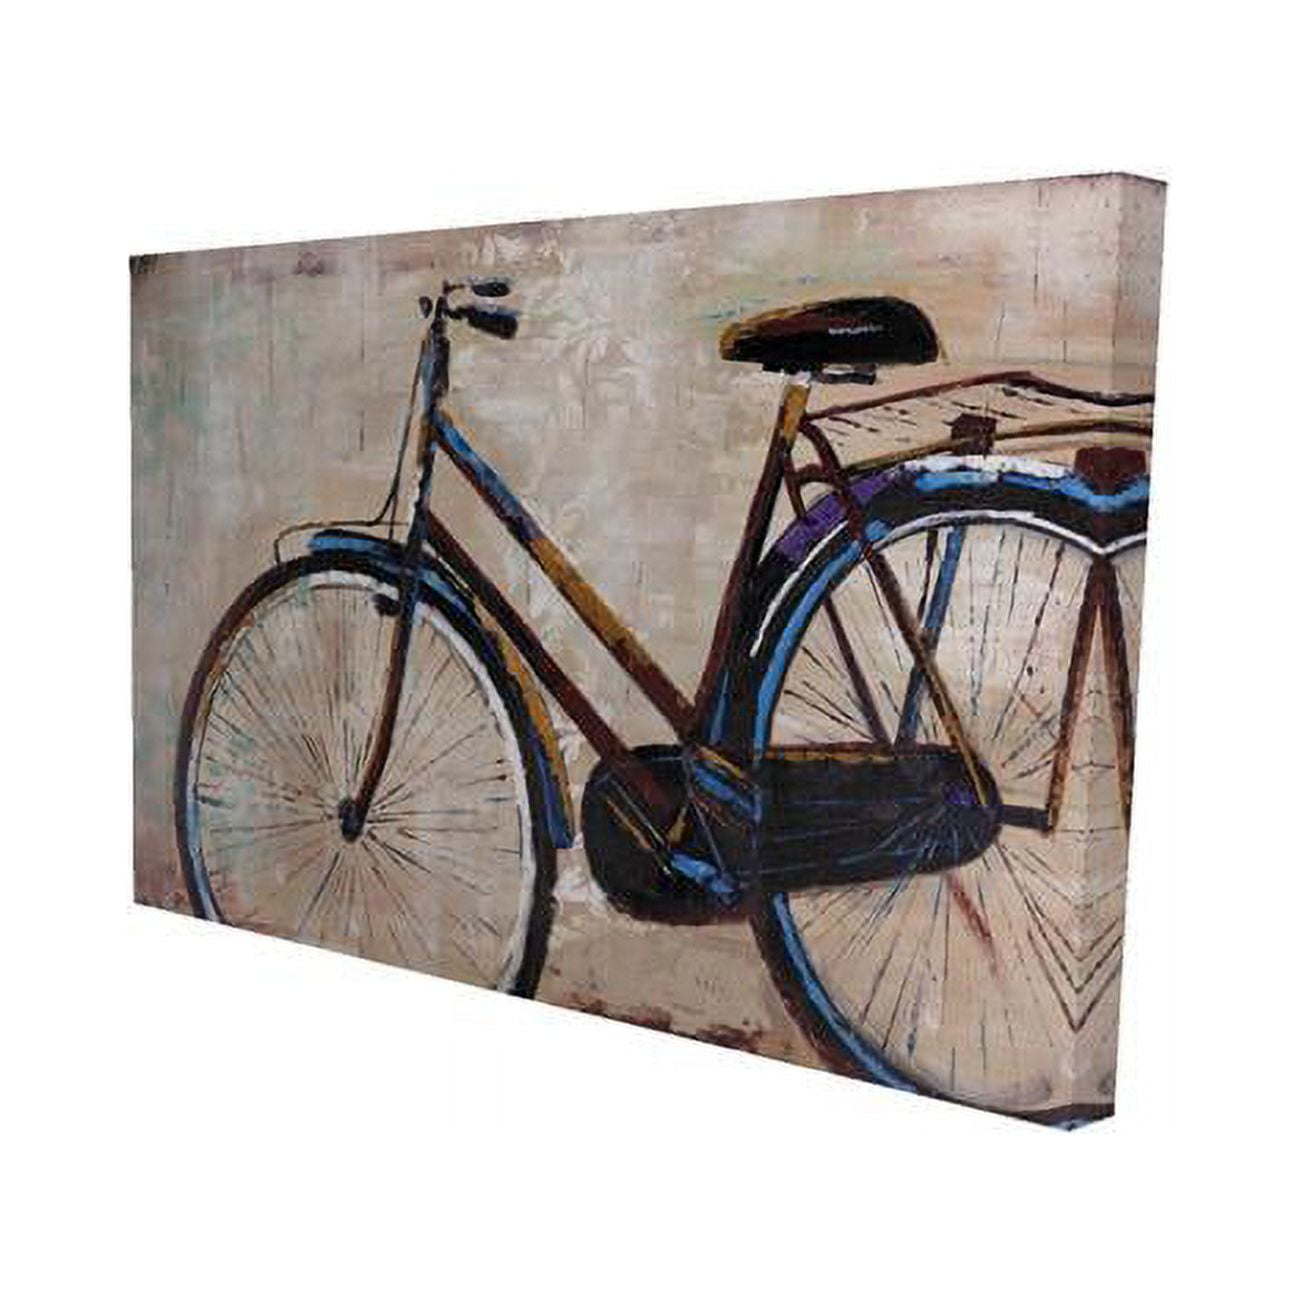 Fondo 20 x 30 in. Industrial Bicycle-Print on Canvas